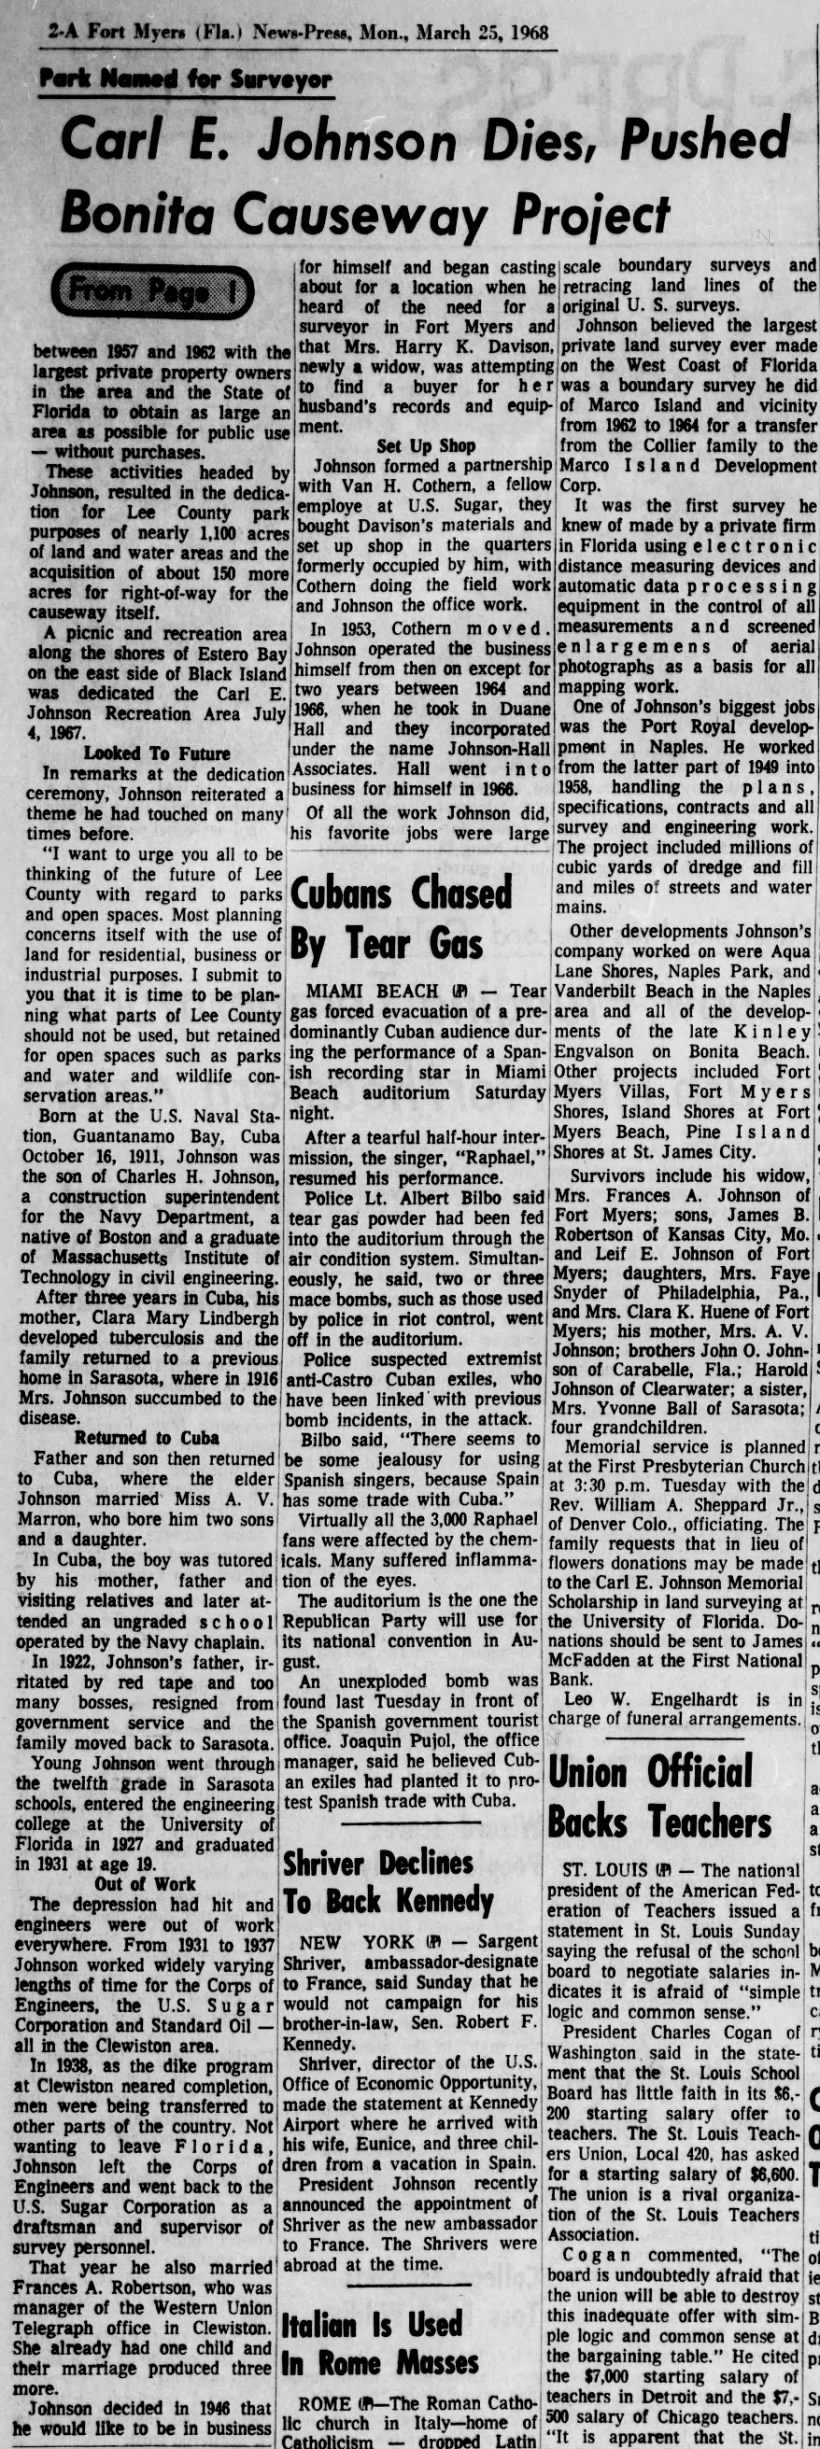 25 March 1968 News-Press,
Fort Myers, FL, p.2A